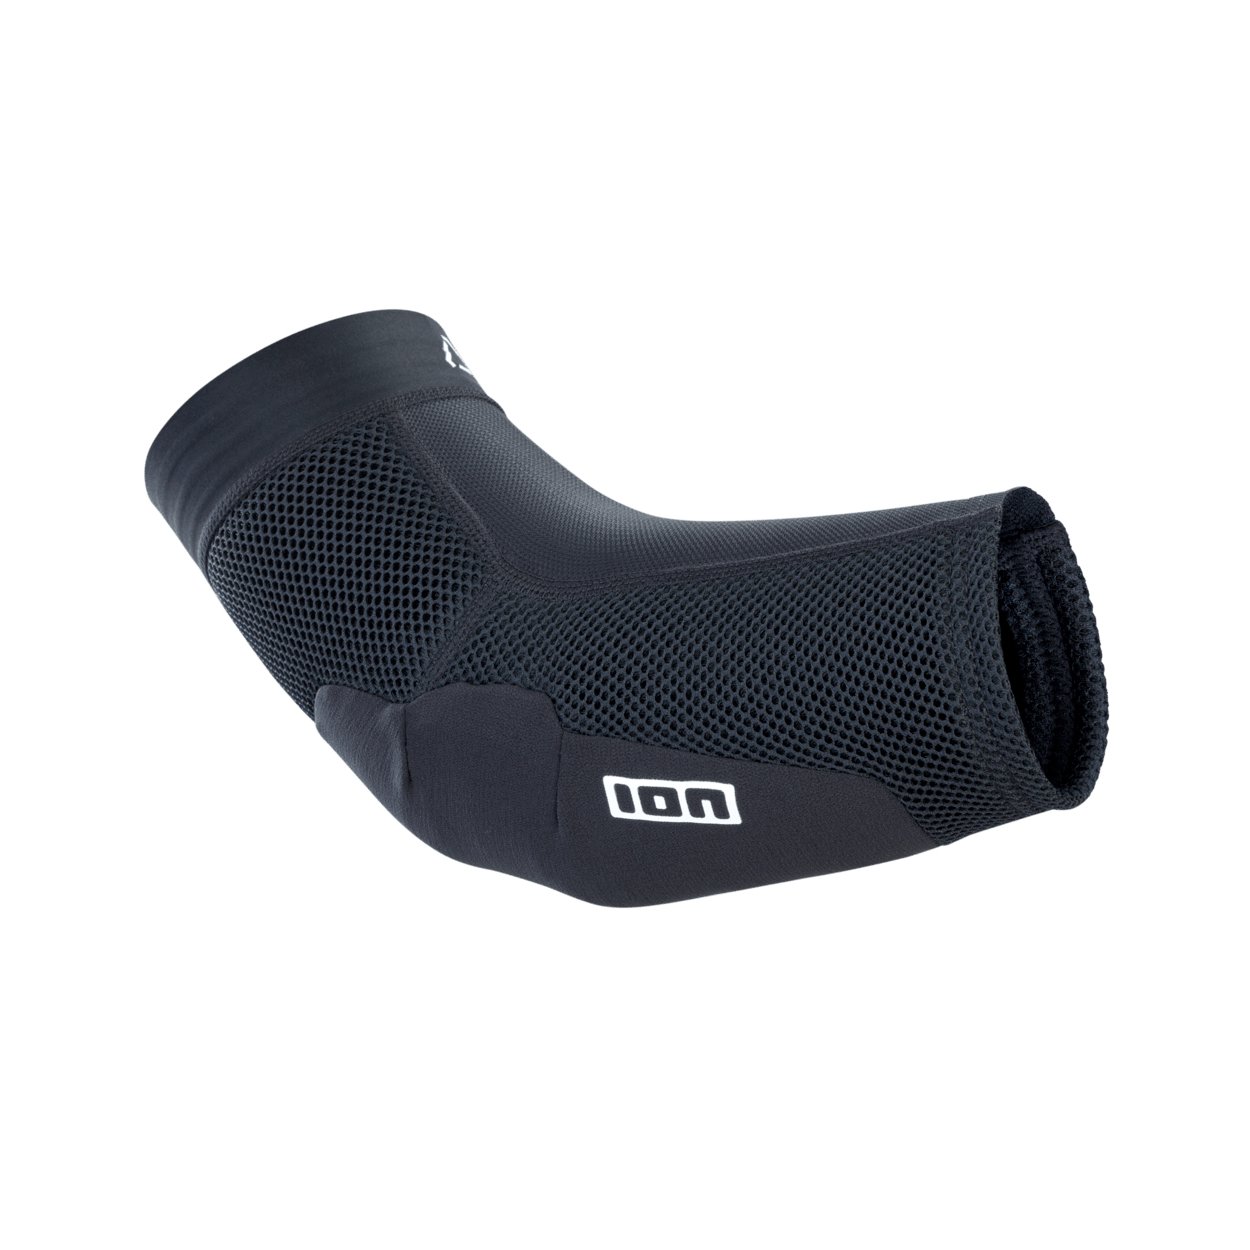 ION MTB Elbow Pads E-Sleeve 2024 - Worthing Watersports - 9010583028651 - Body Armor - ION Bike